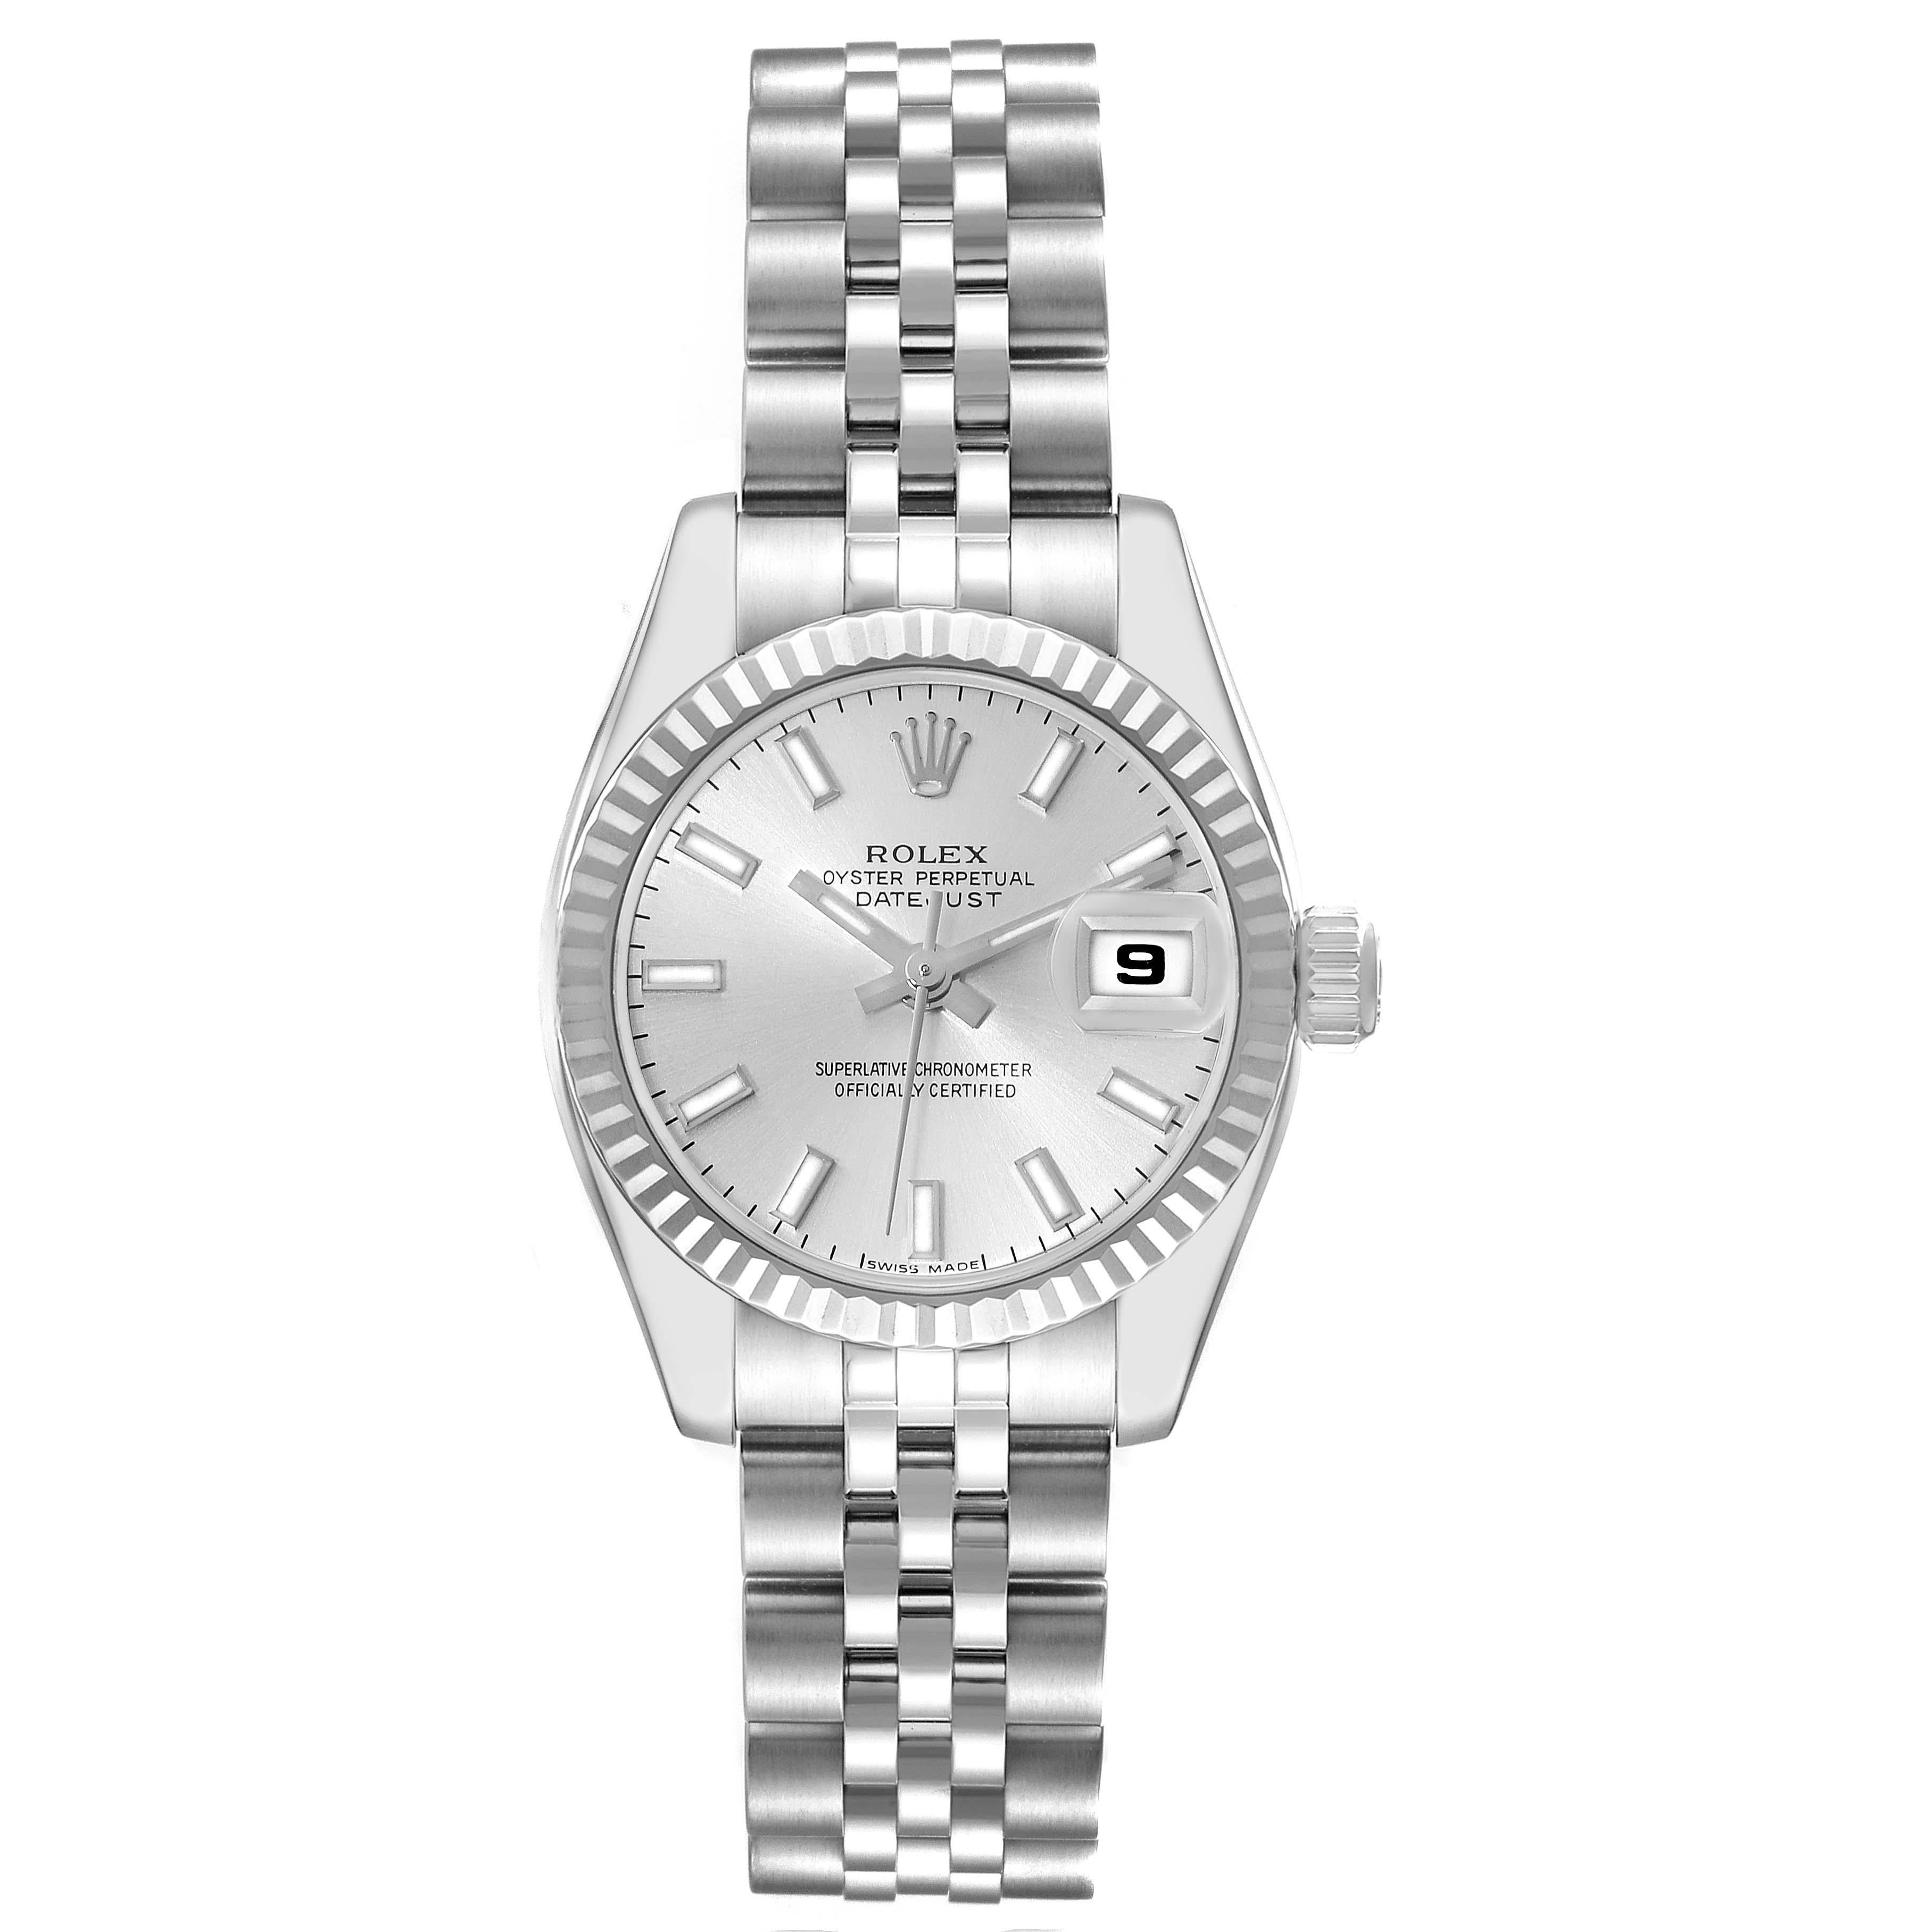 Rolex Datejust Steel White Gold Silver Dial Ladies Watch 179174 Box Papers en vente 2